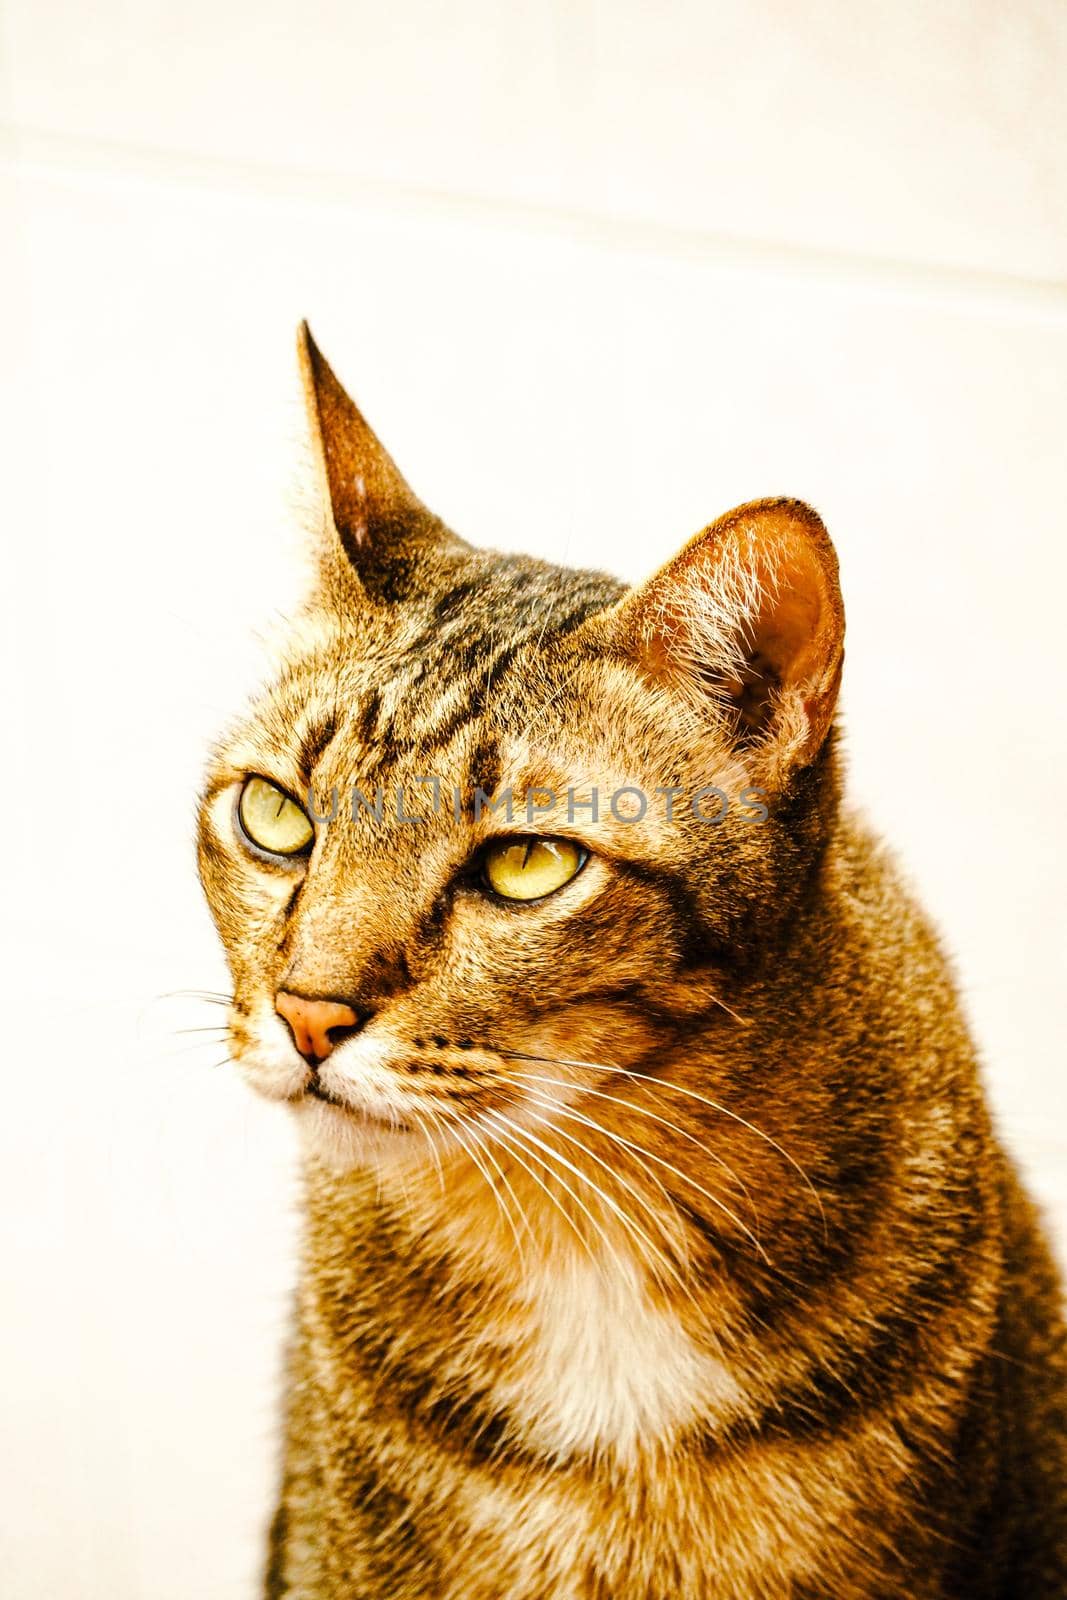 adorable animal pet tabby cat close up face on white background by Petrichor